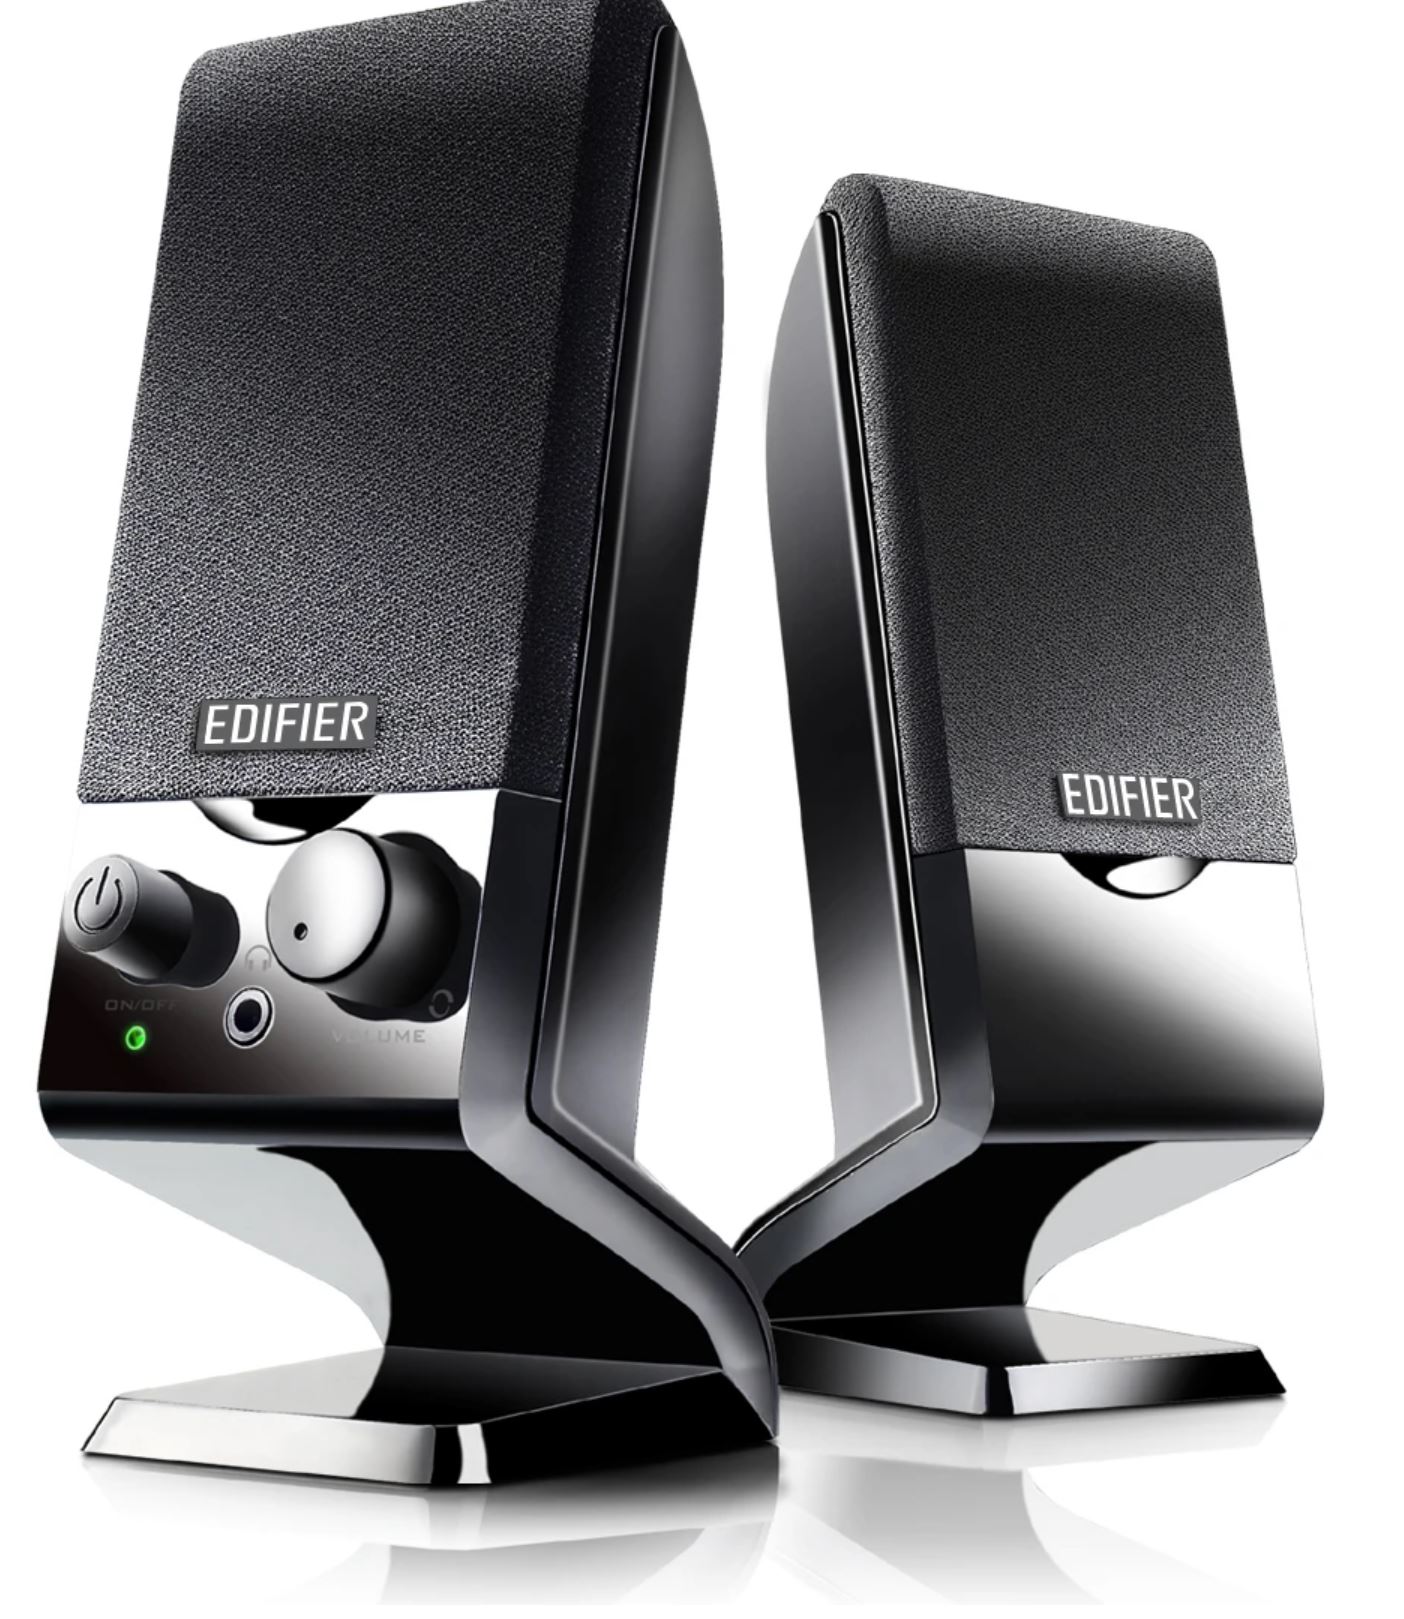 EDIFIER M1250 USB powered, compact 2.0 speaker system